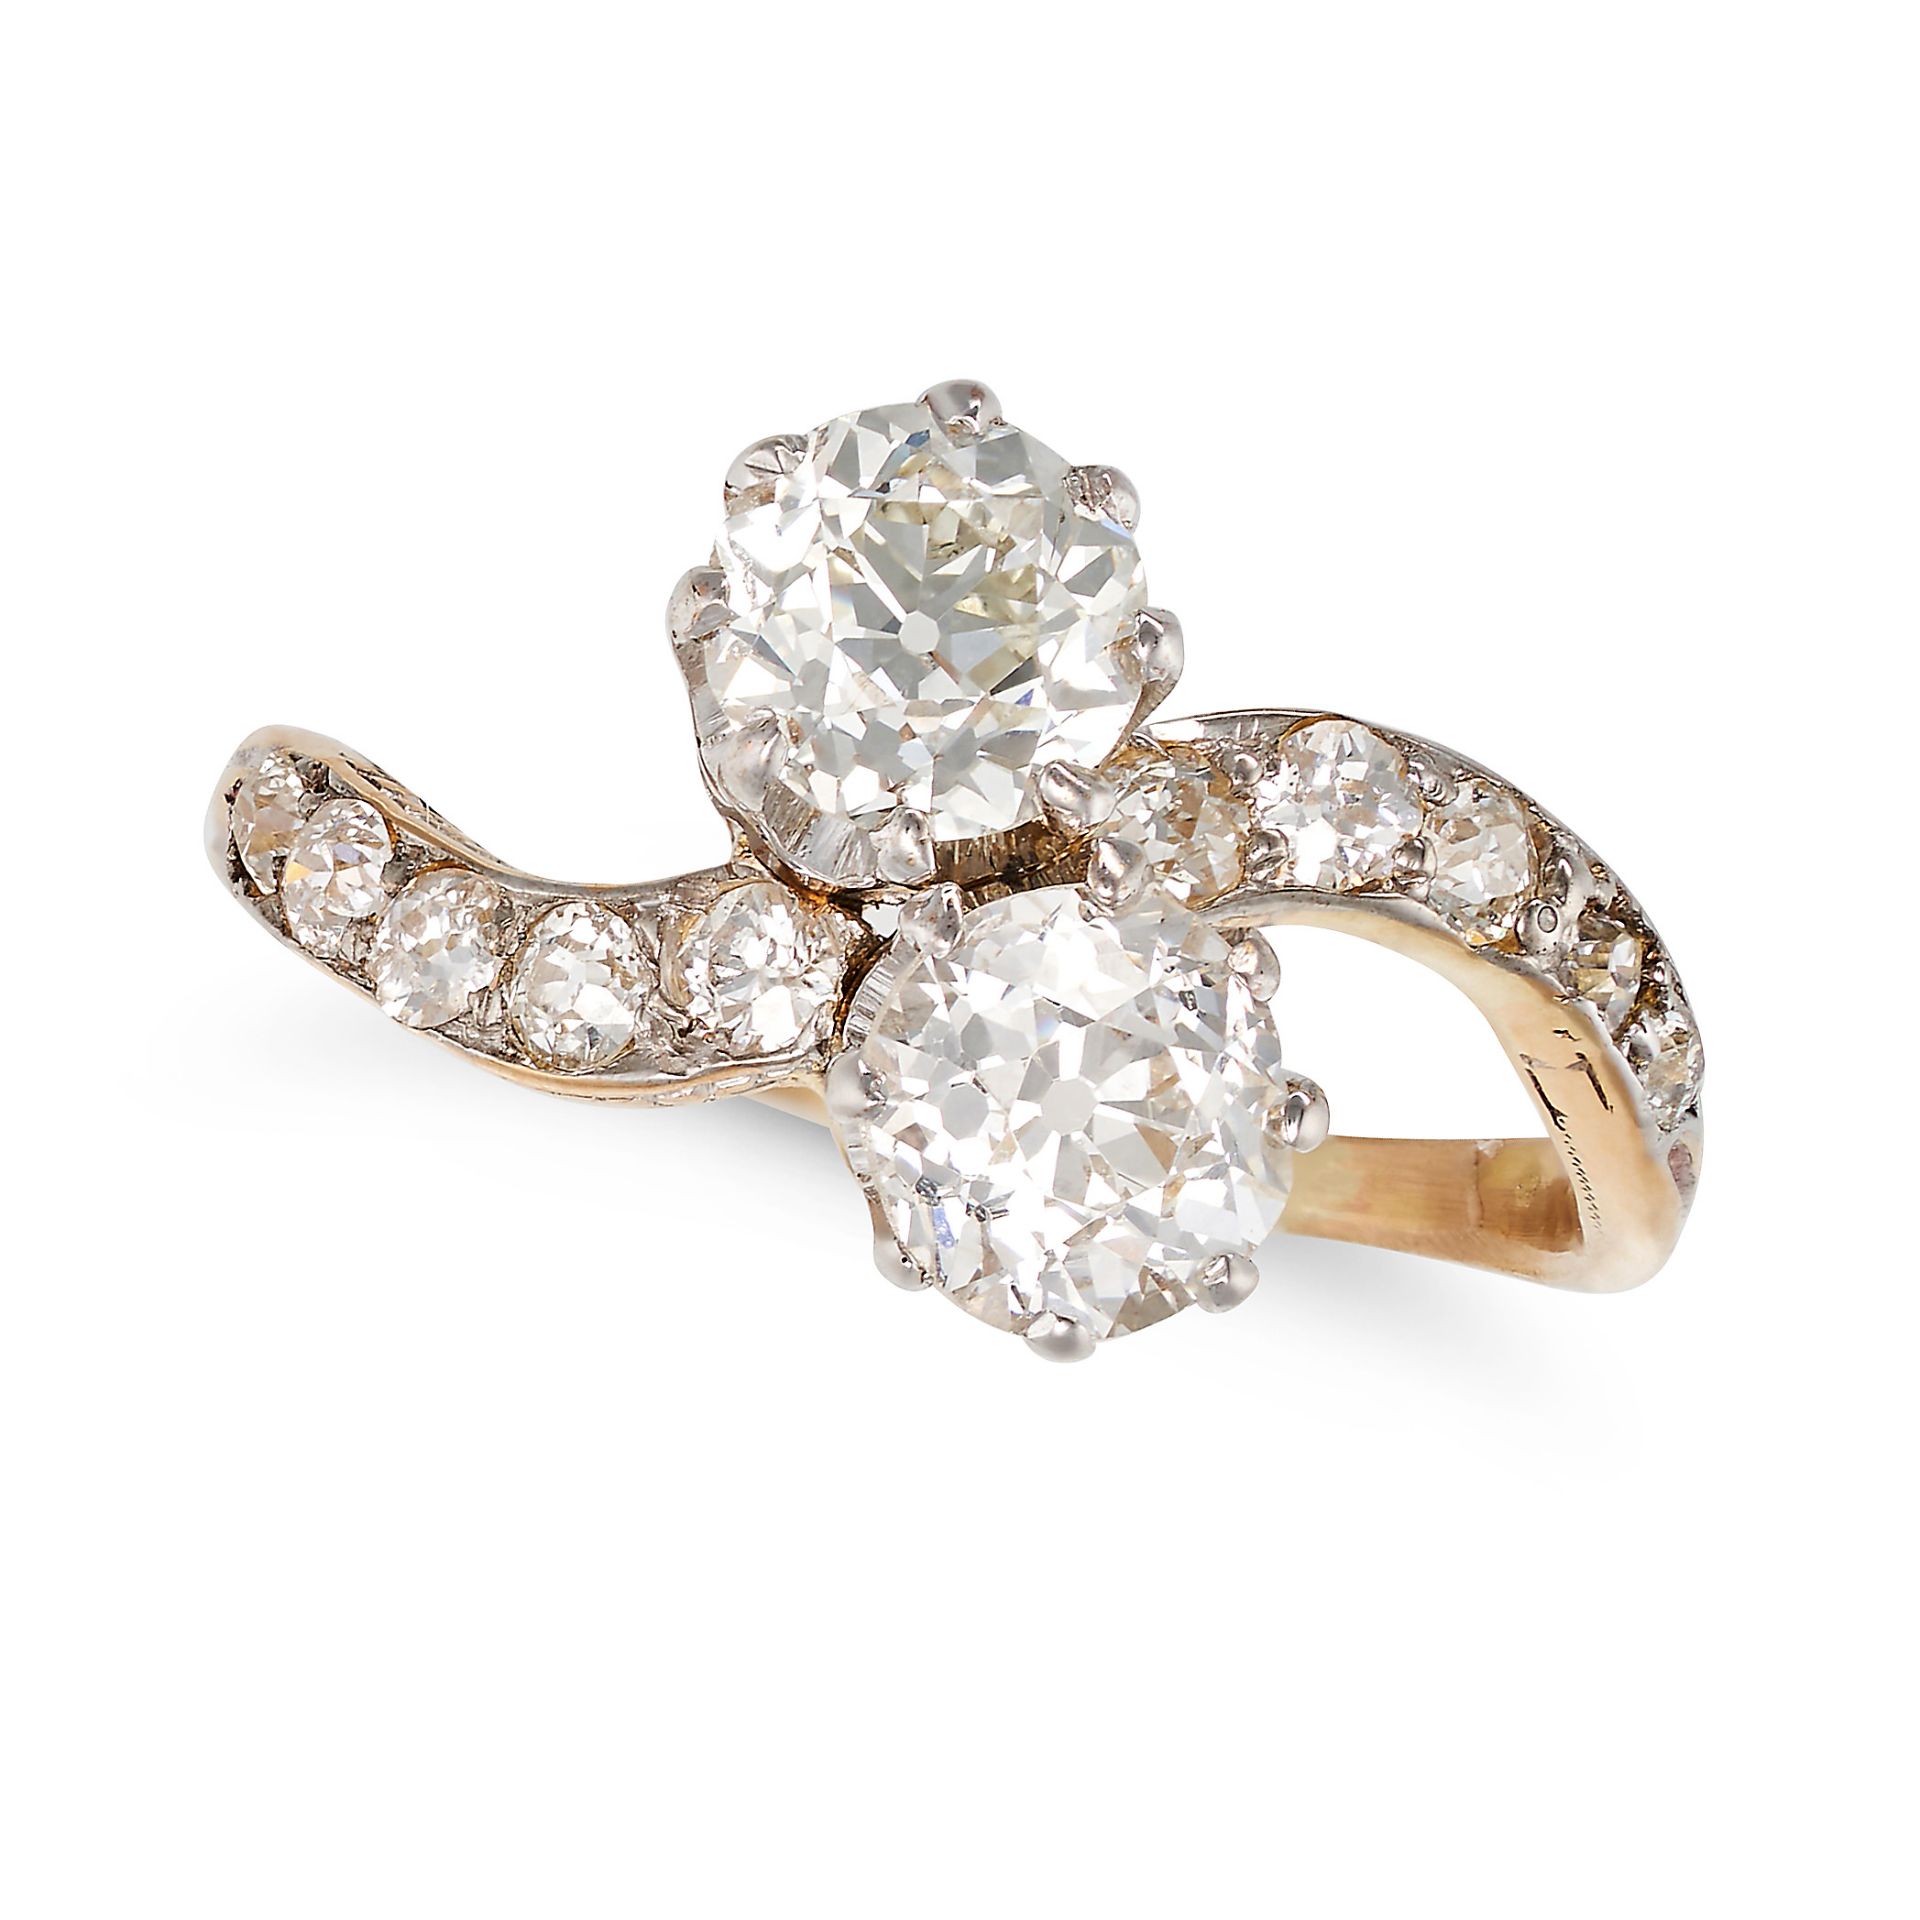 A FINE ANTIQUE DIAMOND TOI ET MOI RING, EARLY 20TH CENTURY in 18ct yellow gold, set with two old ...